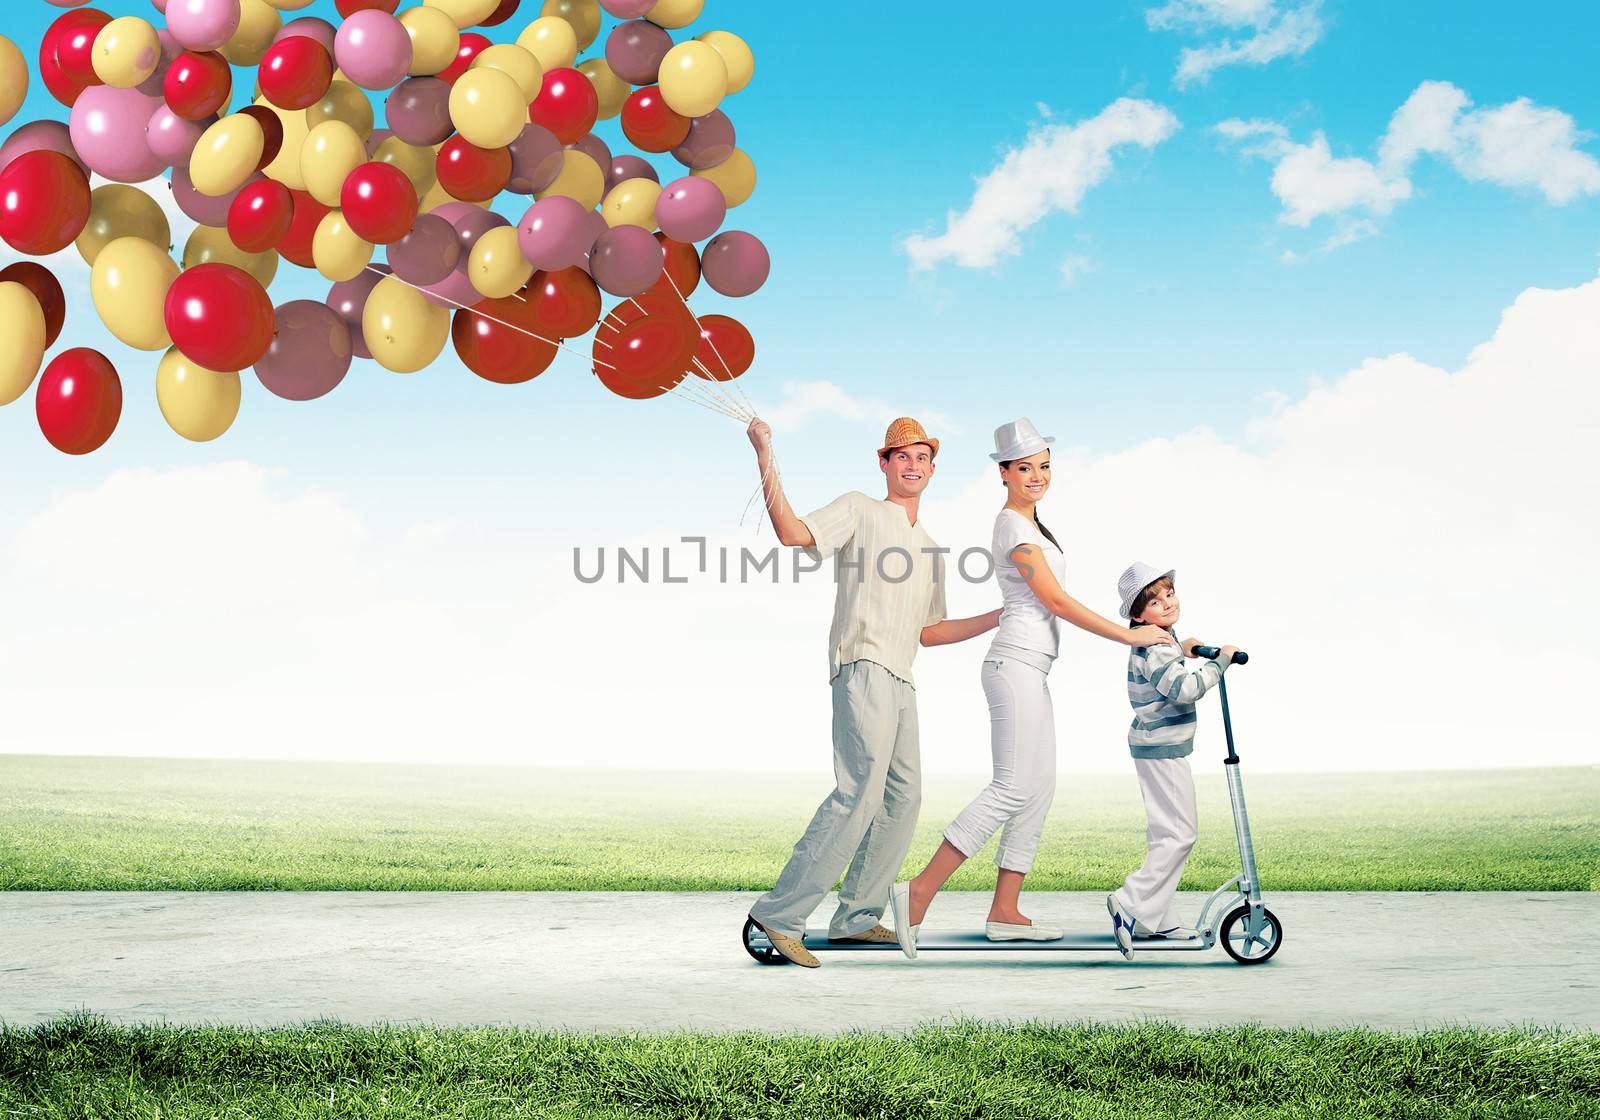 Image of happy young family riding on scooter pulling bunch of colorful balloons